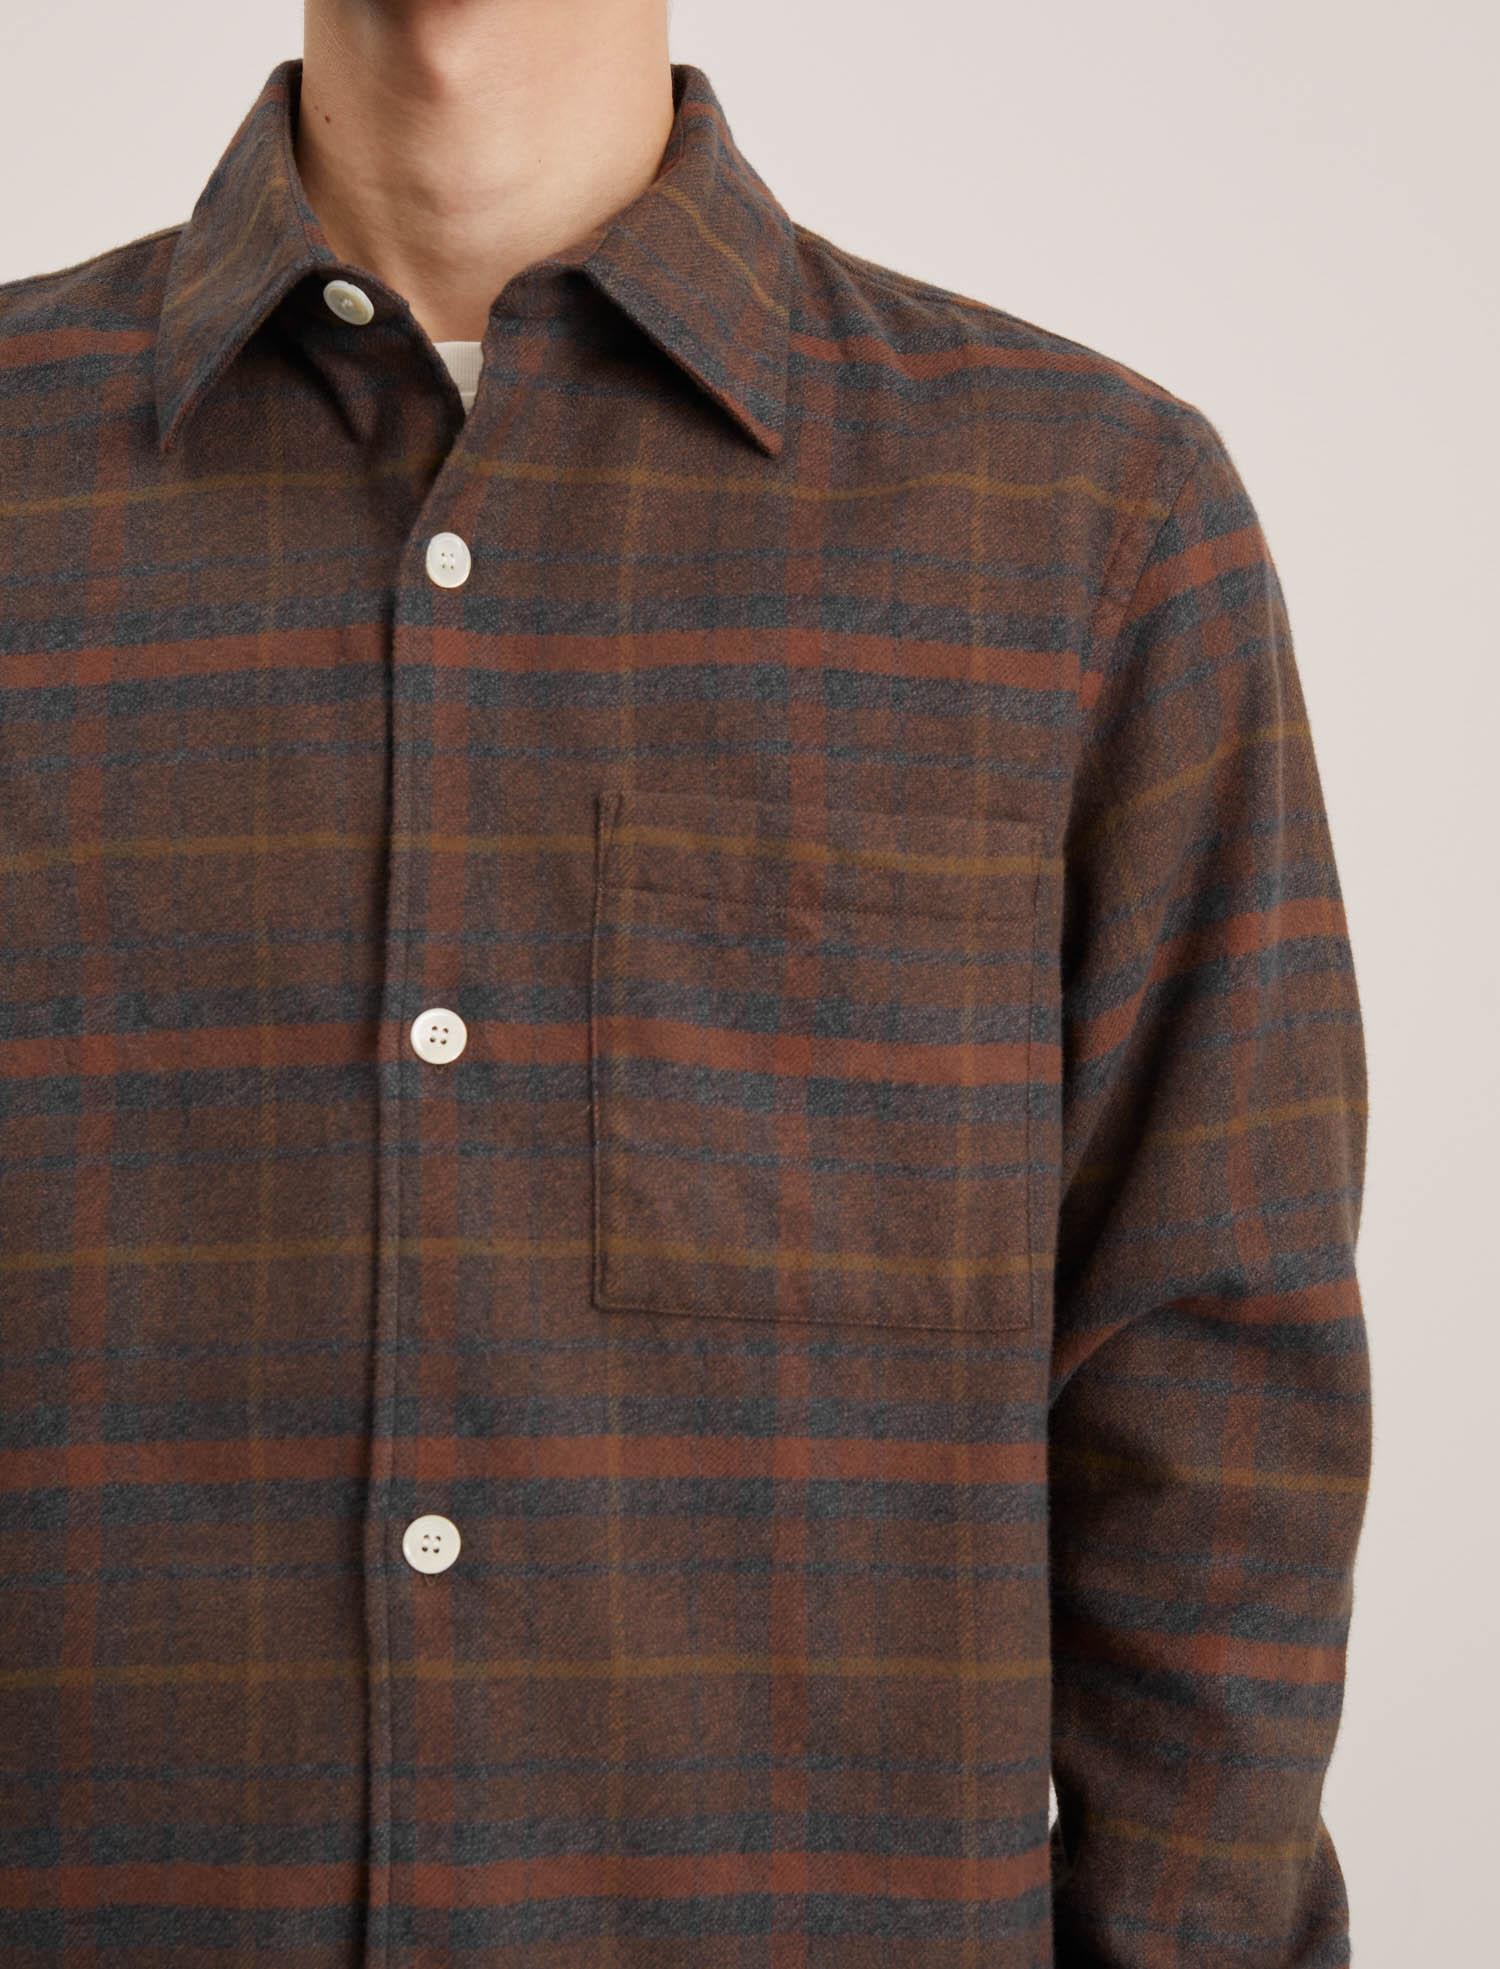 ANOTHER Shirt 4.0, Brown Check